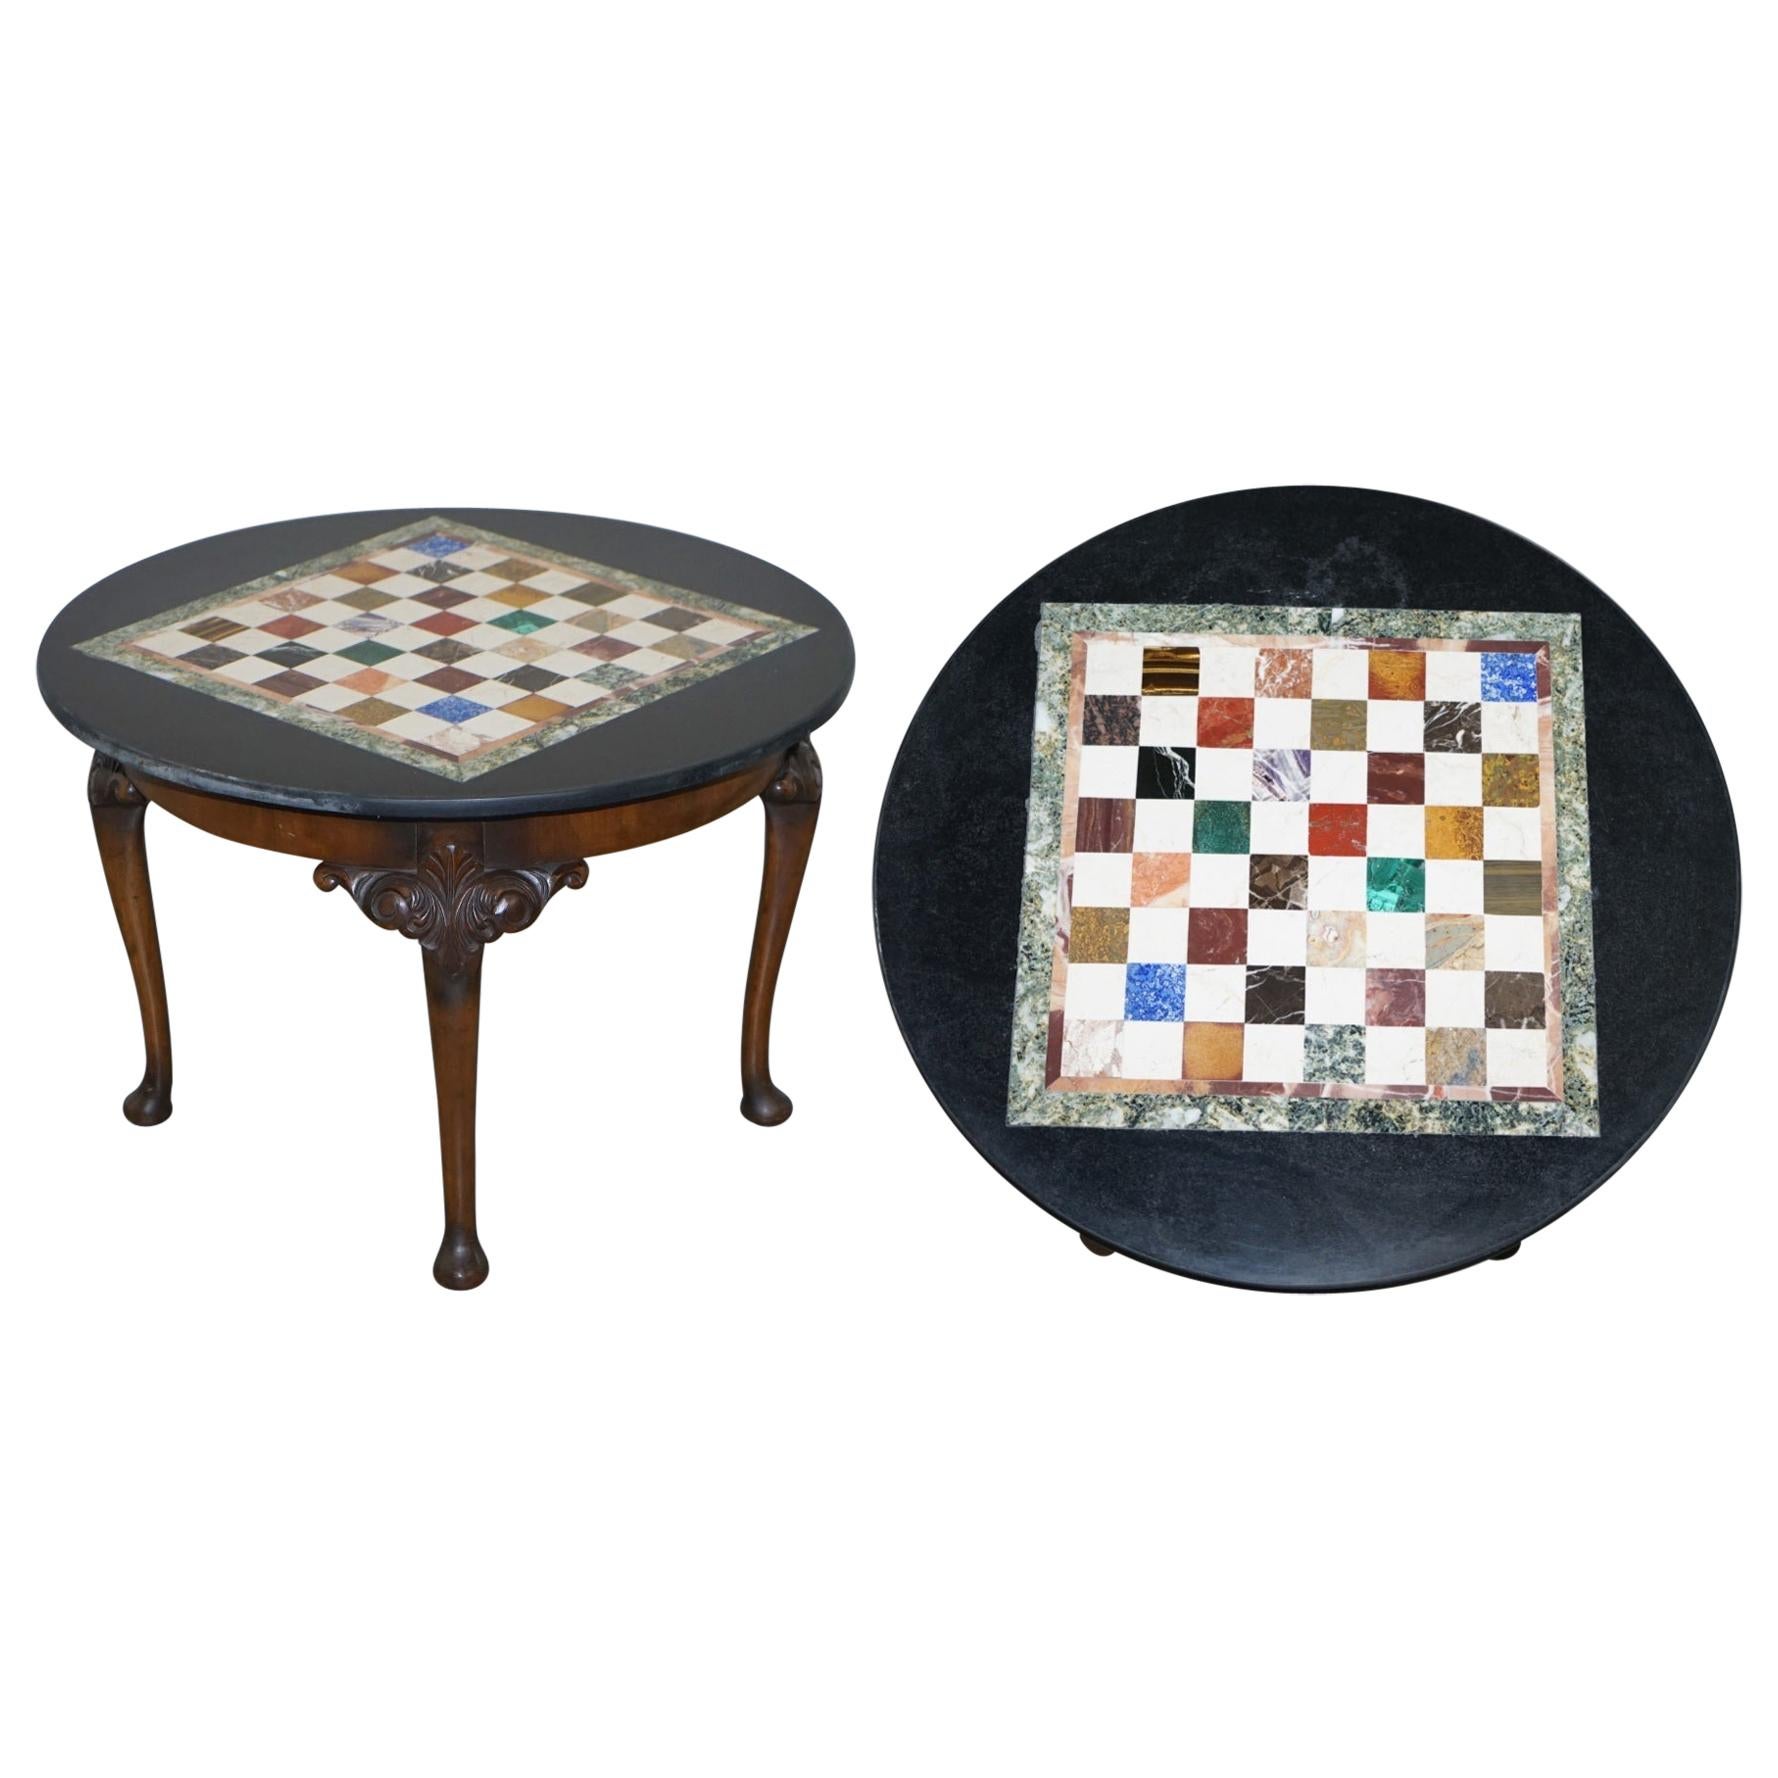 Details about   Black Marble Coffee Chess Table Top Mosaic Inlaid Marquetry Art Home Decor H1927 